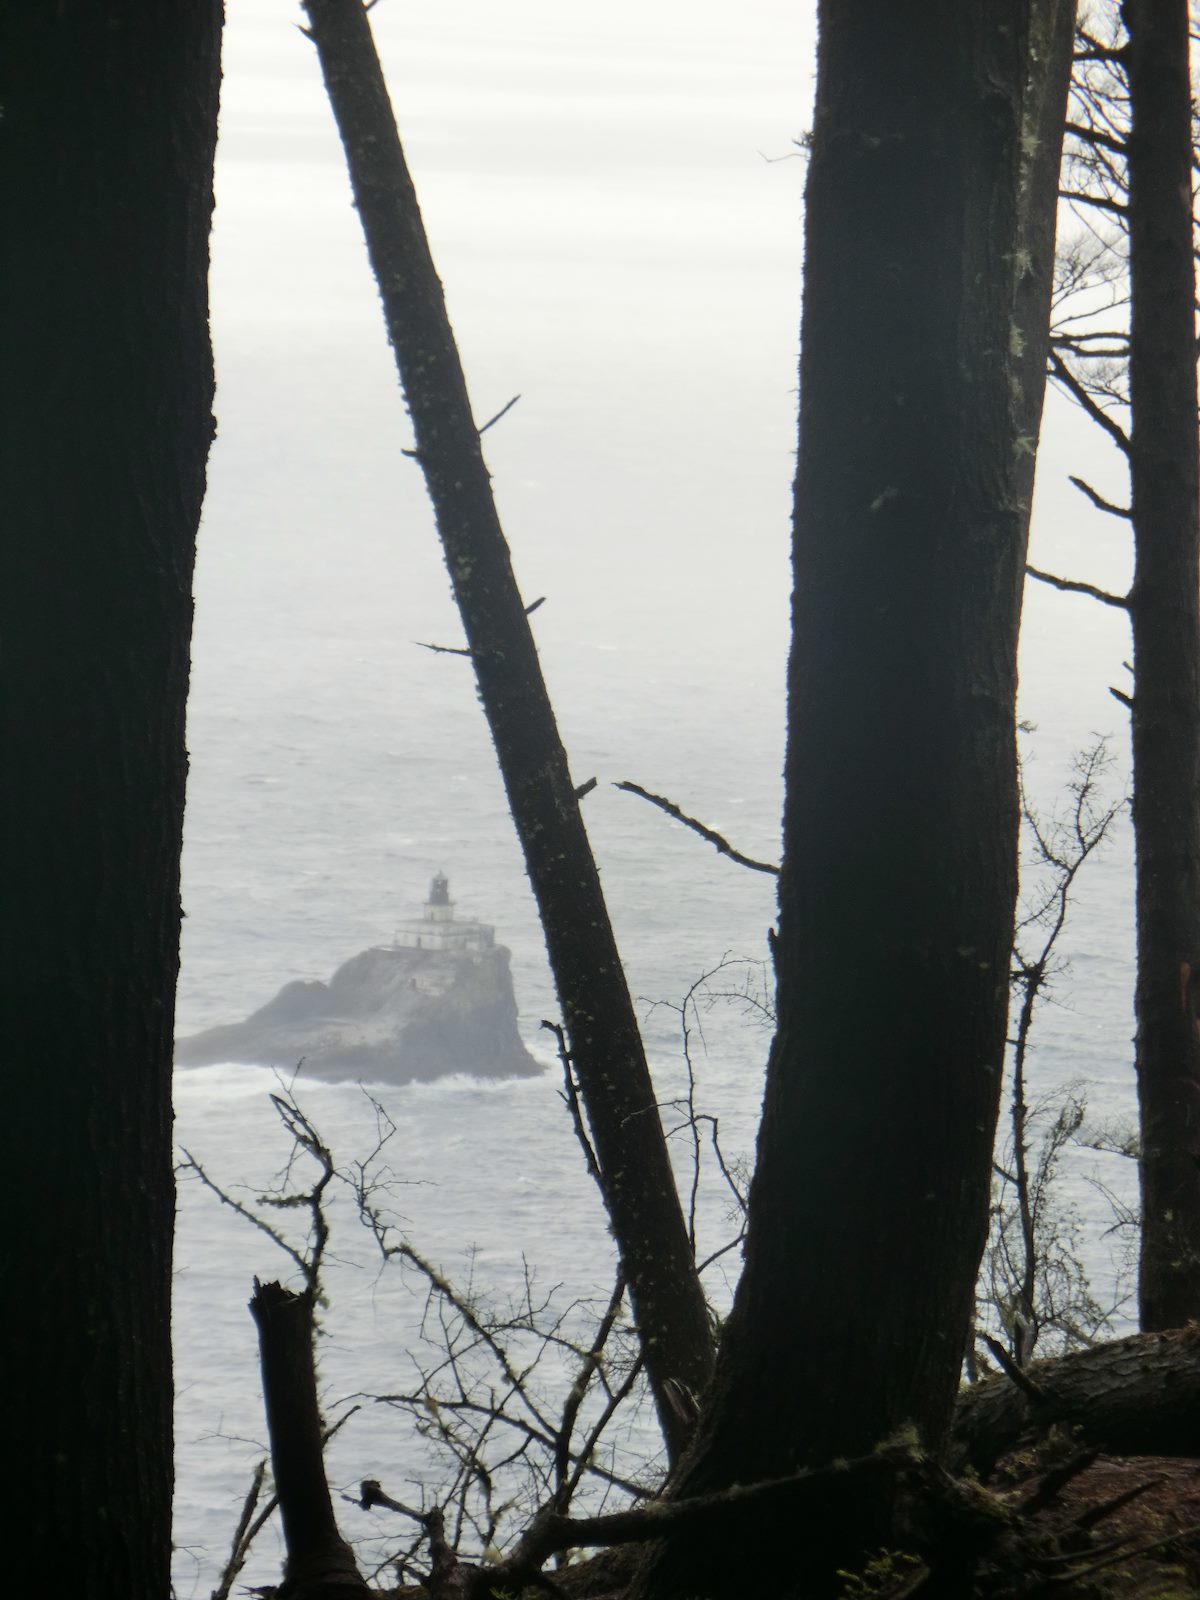 2012 May First glimpse of Tillamook Rock Lighthouse